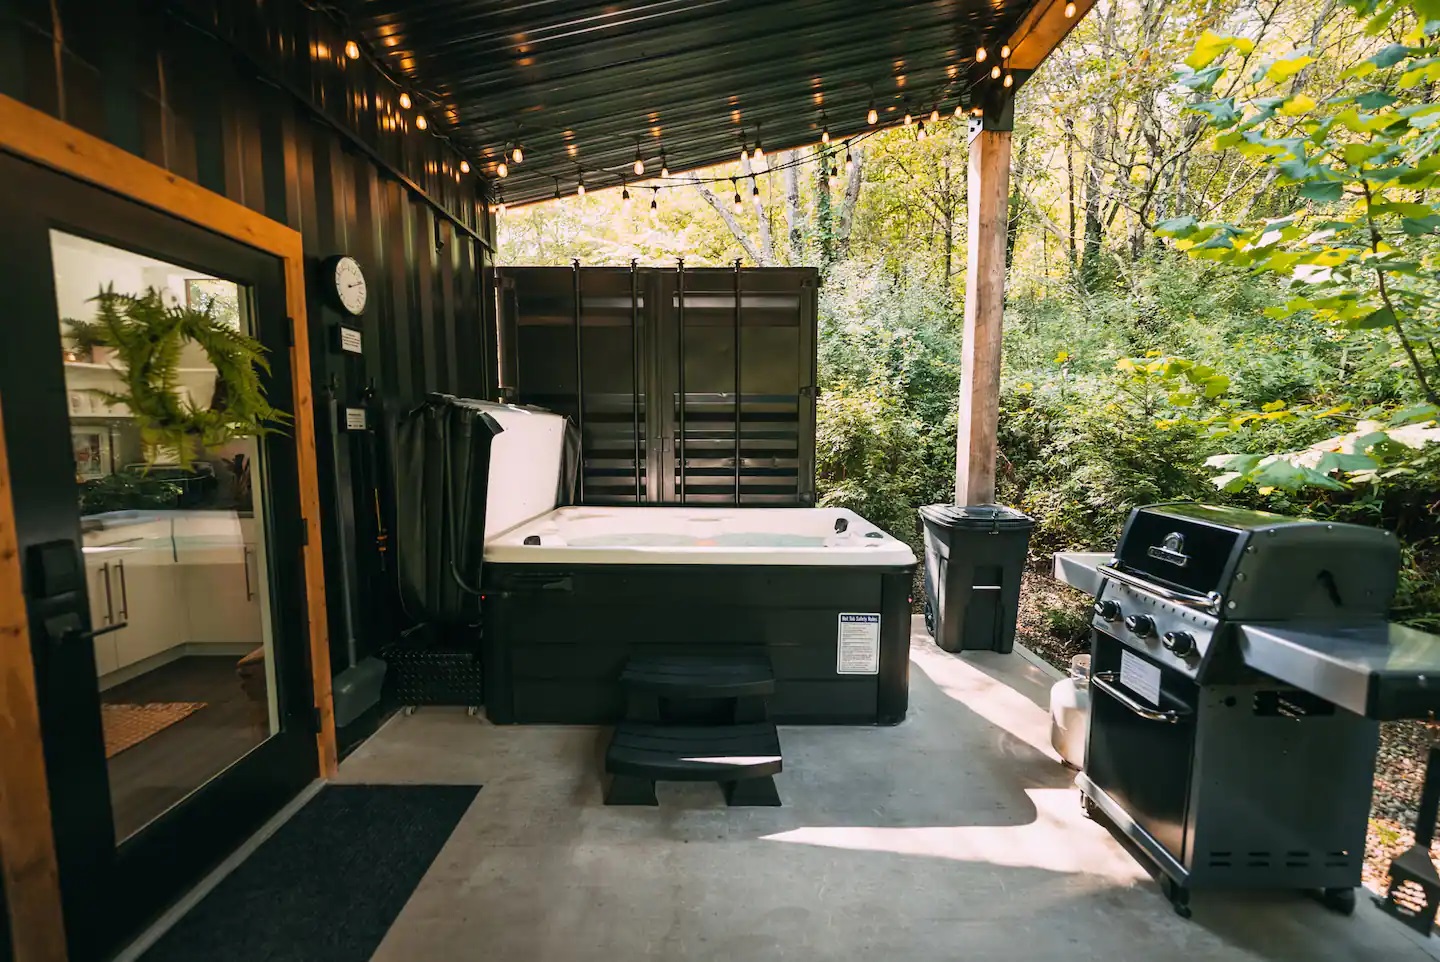 Hot tub and grill on porch in front of door